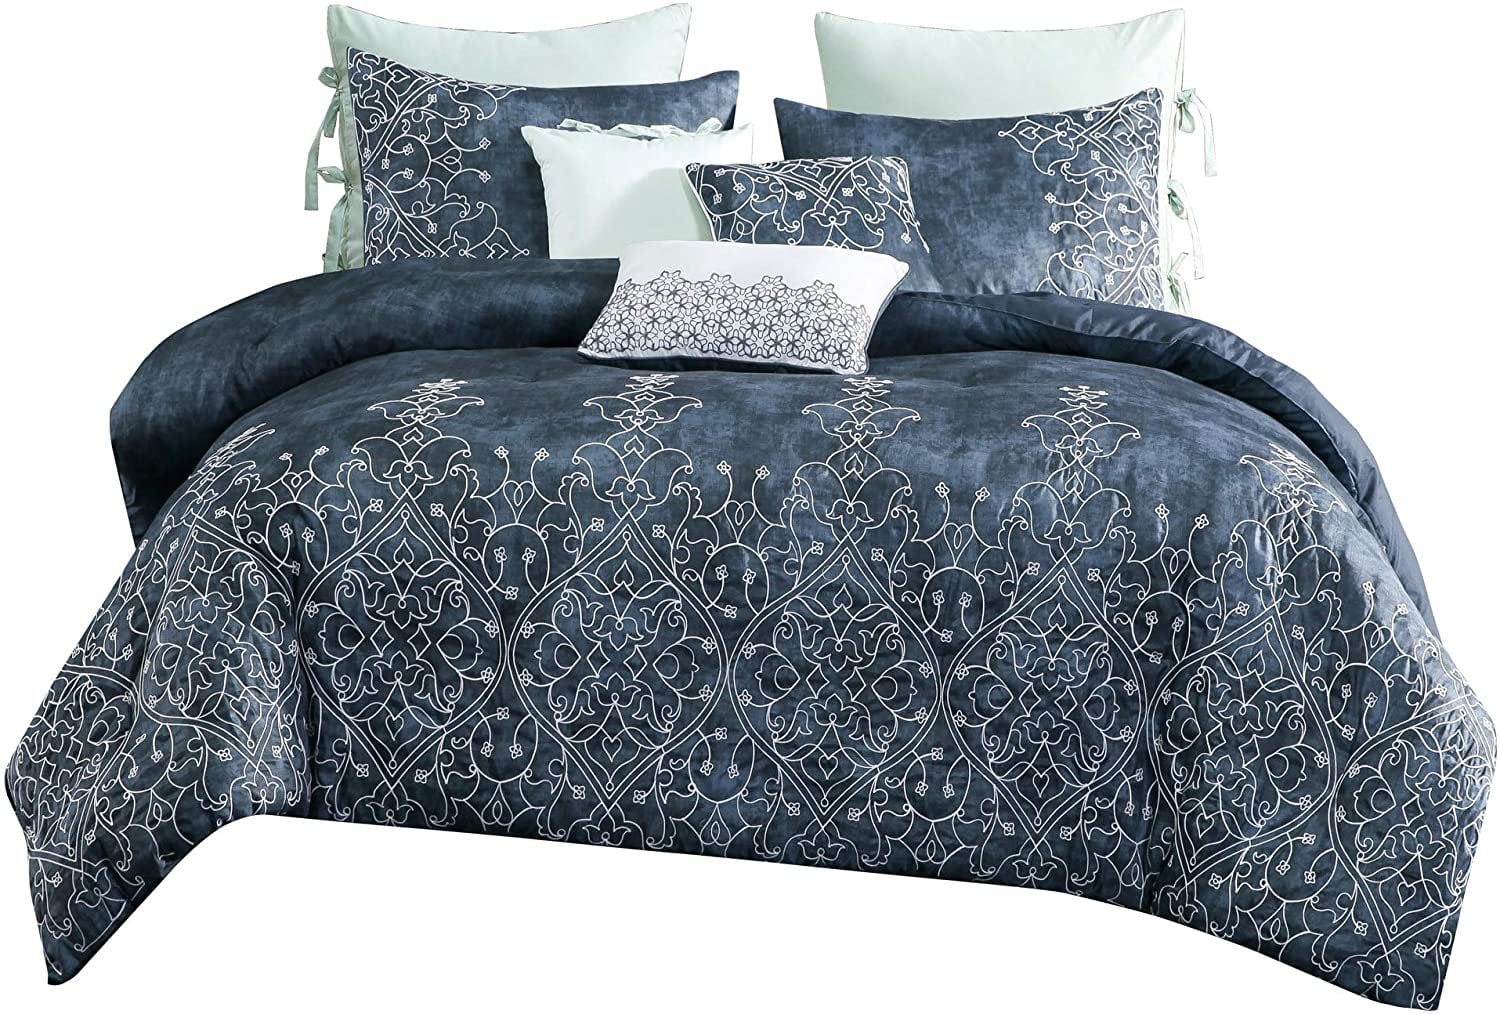 King California Comforter Set, Difference Between King And California Bedspreads